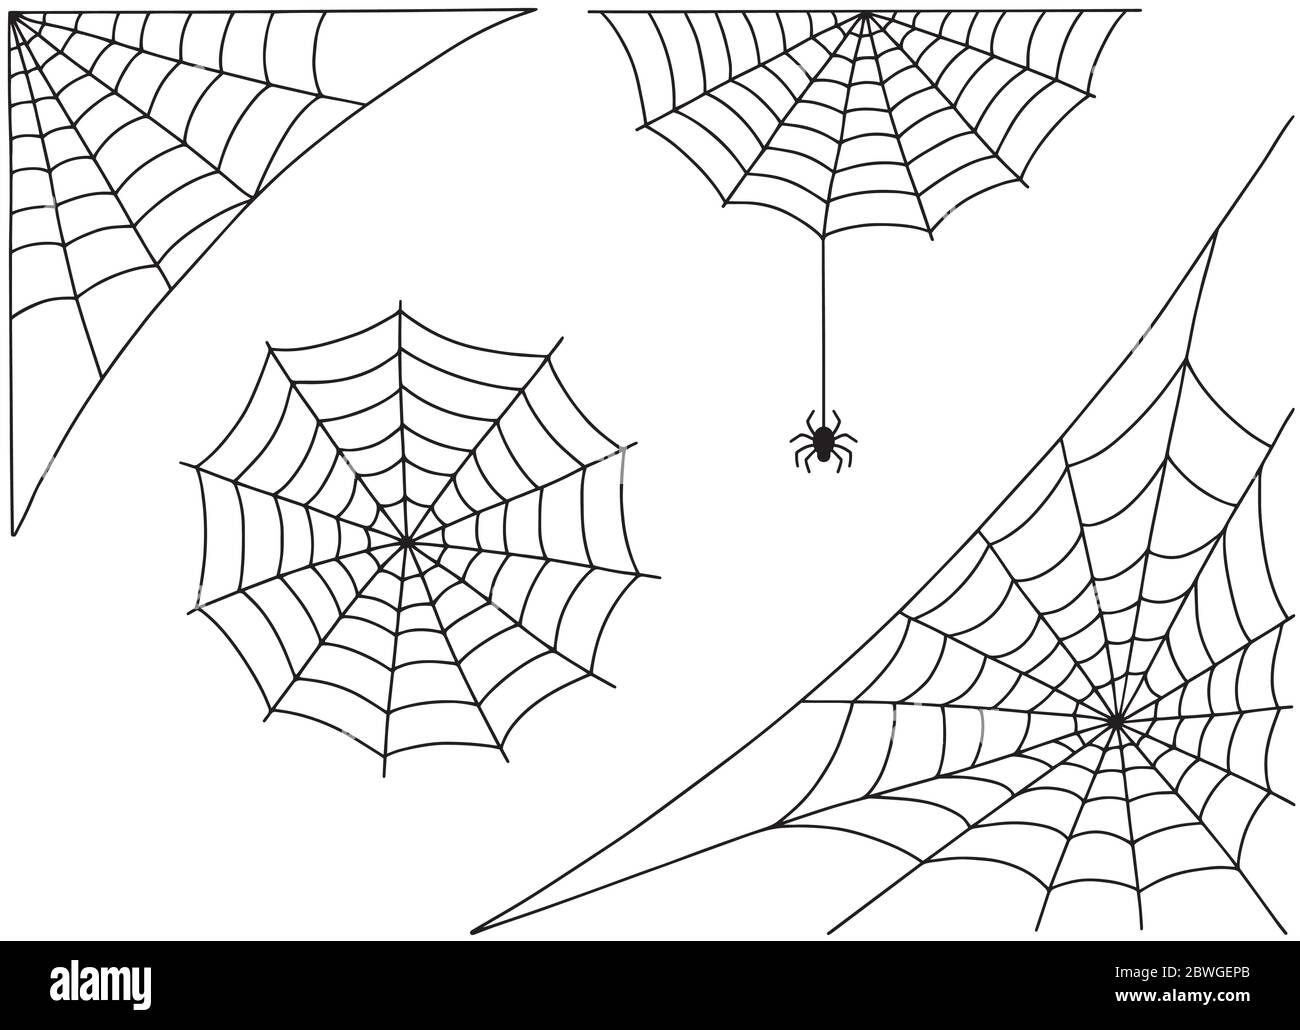 Halloween spider web and spider isolated on white background. Hector venom cobweb set. Stock Vector